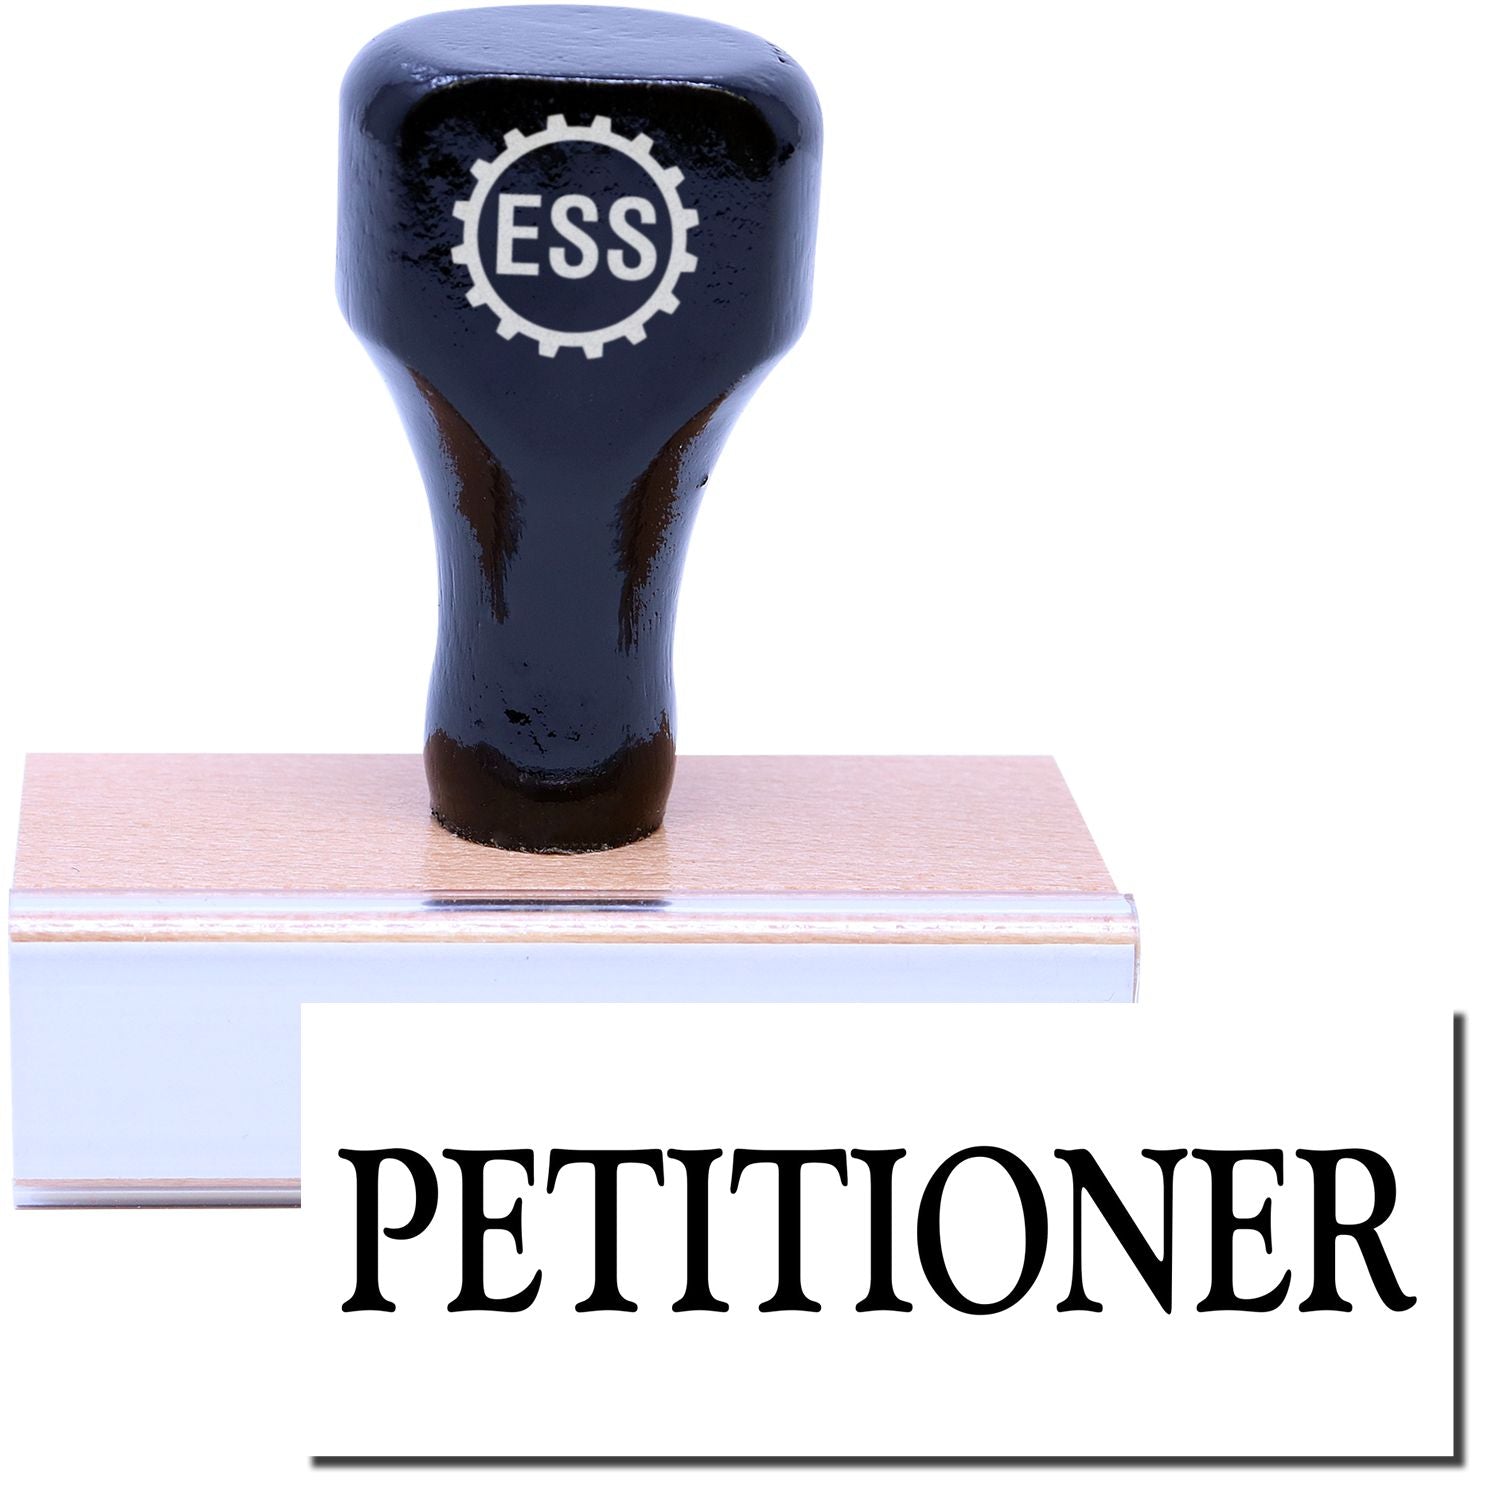 A stock office legal rubber stamp with a stamped image showing how the text "PETITIONER" is displayed after stamping.